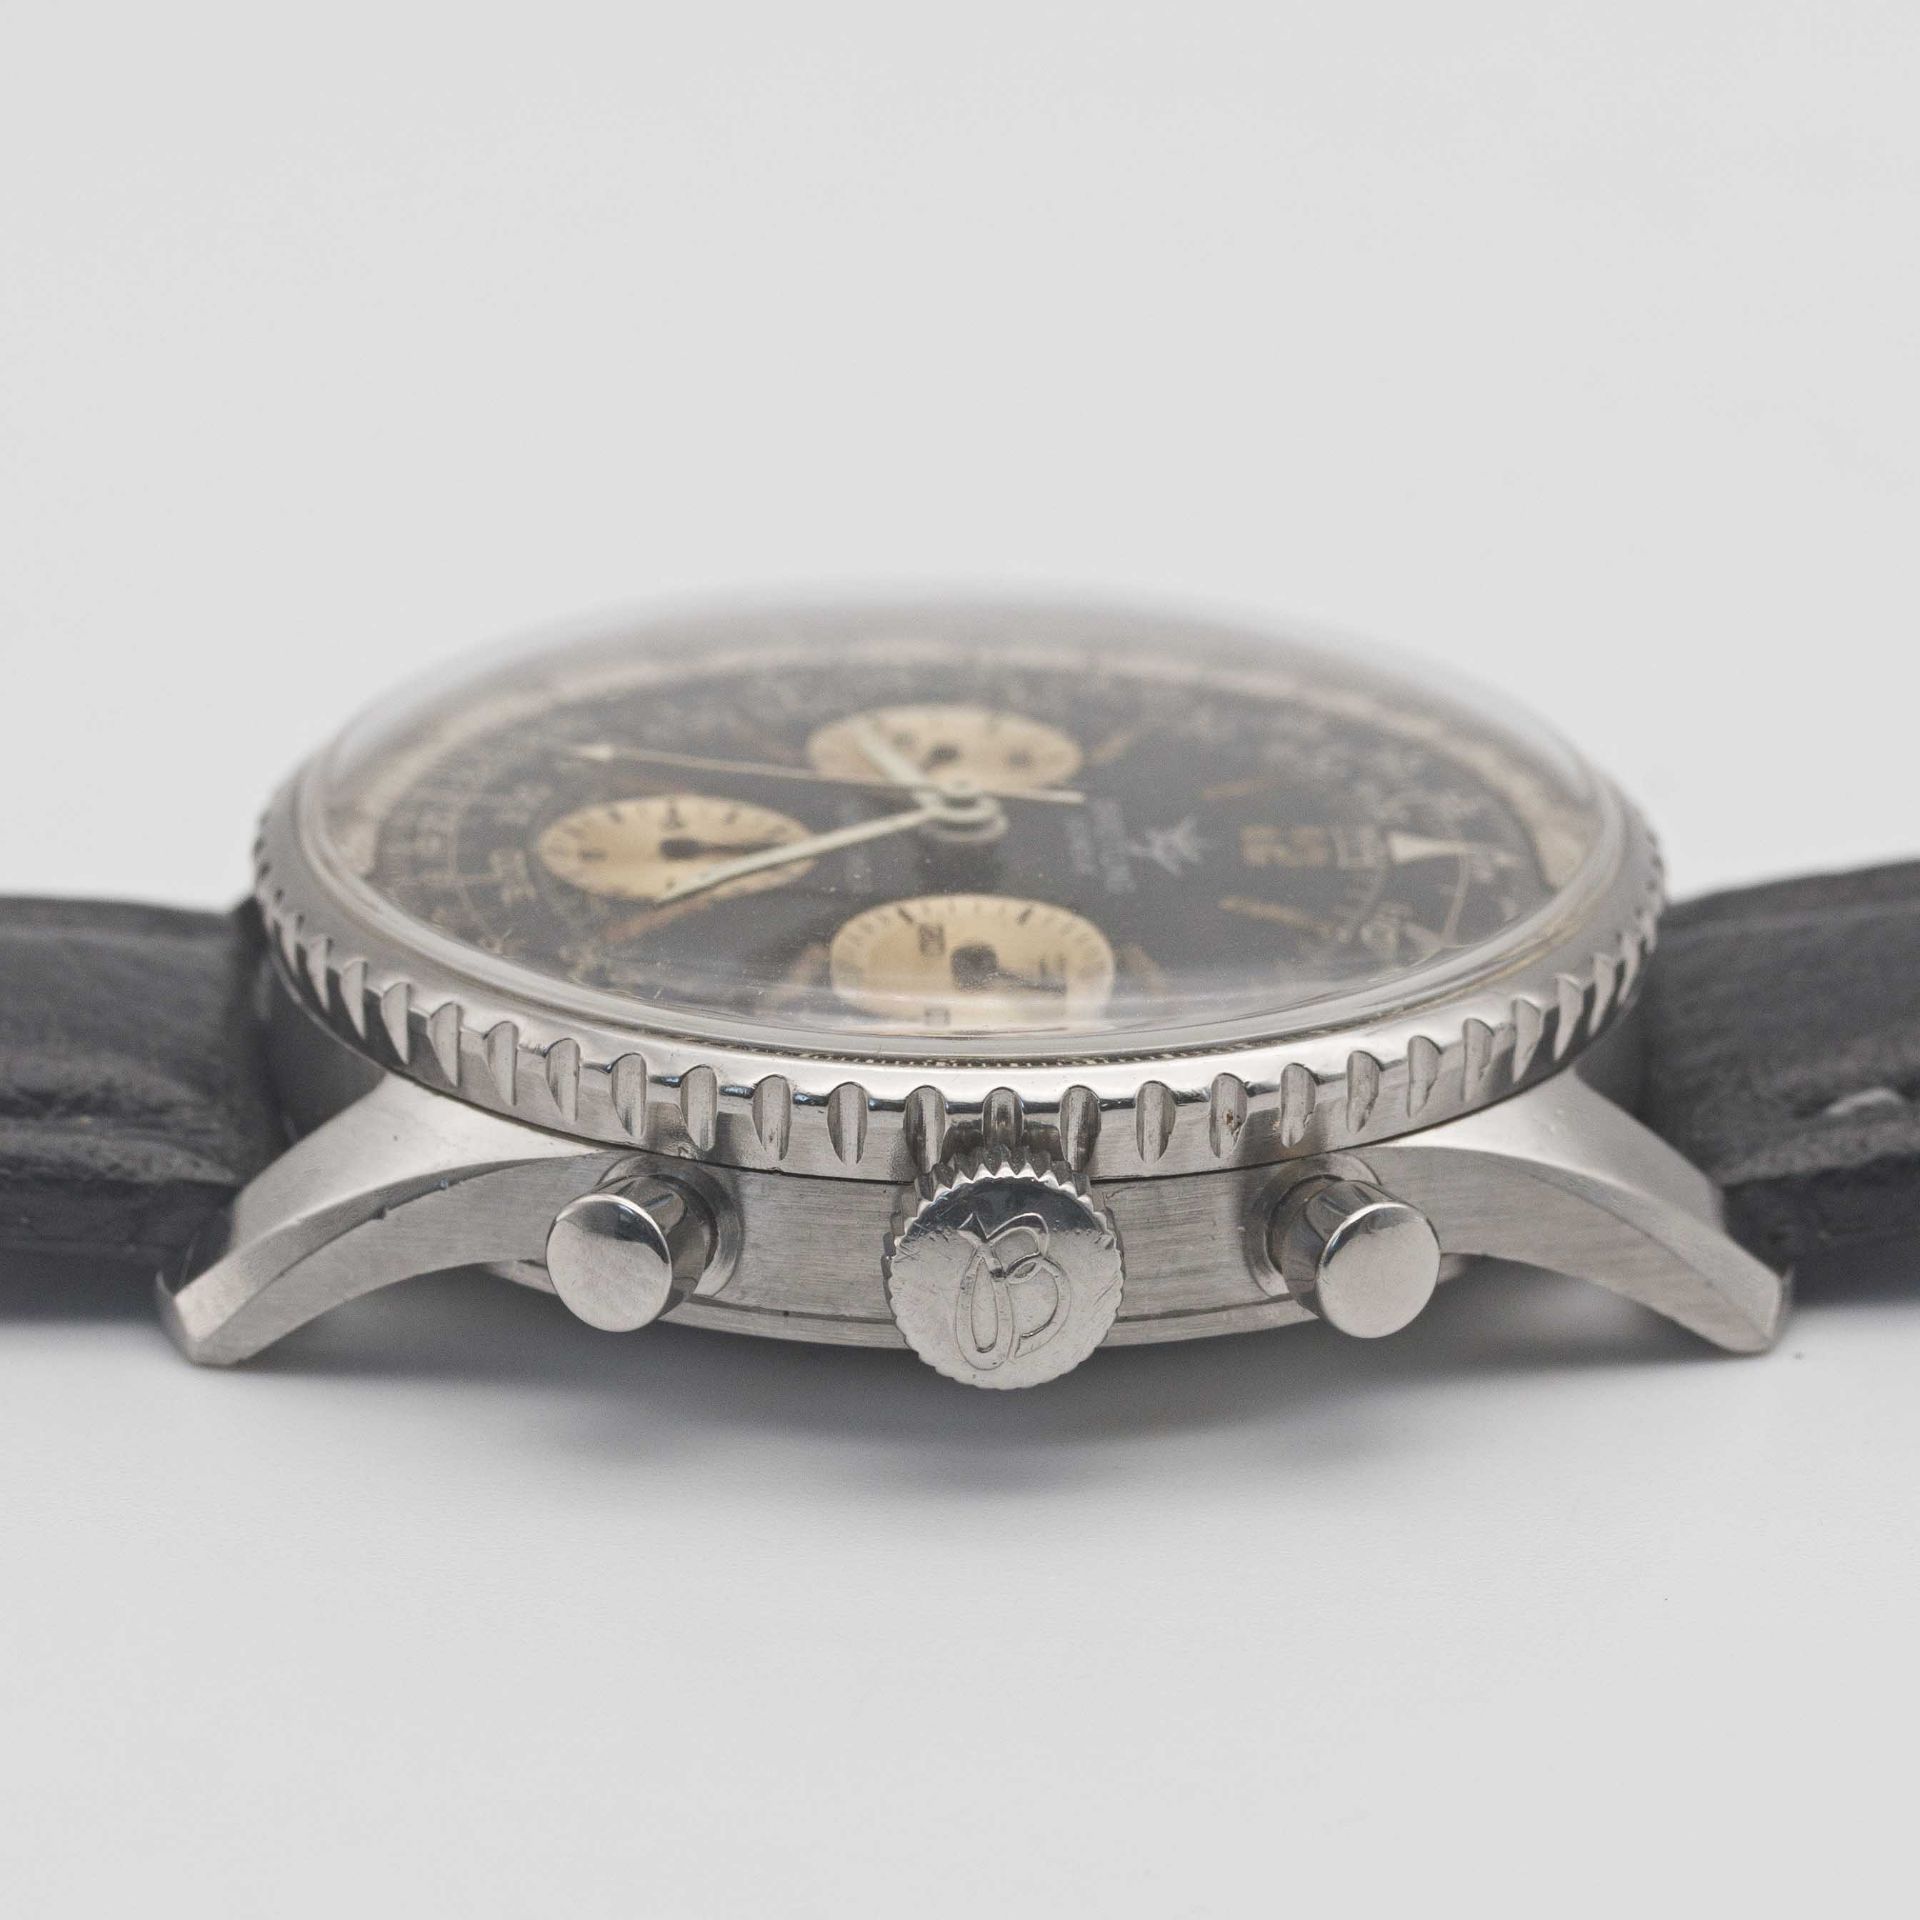 A GENTLEMAN'S STAINLESS STEEL BREITLING NAVITIMER CHRONOGRAPH WRIST WATCH CIRCA 1966, REF. 806 - Image 8 of 9